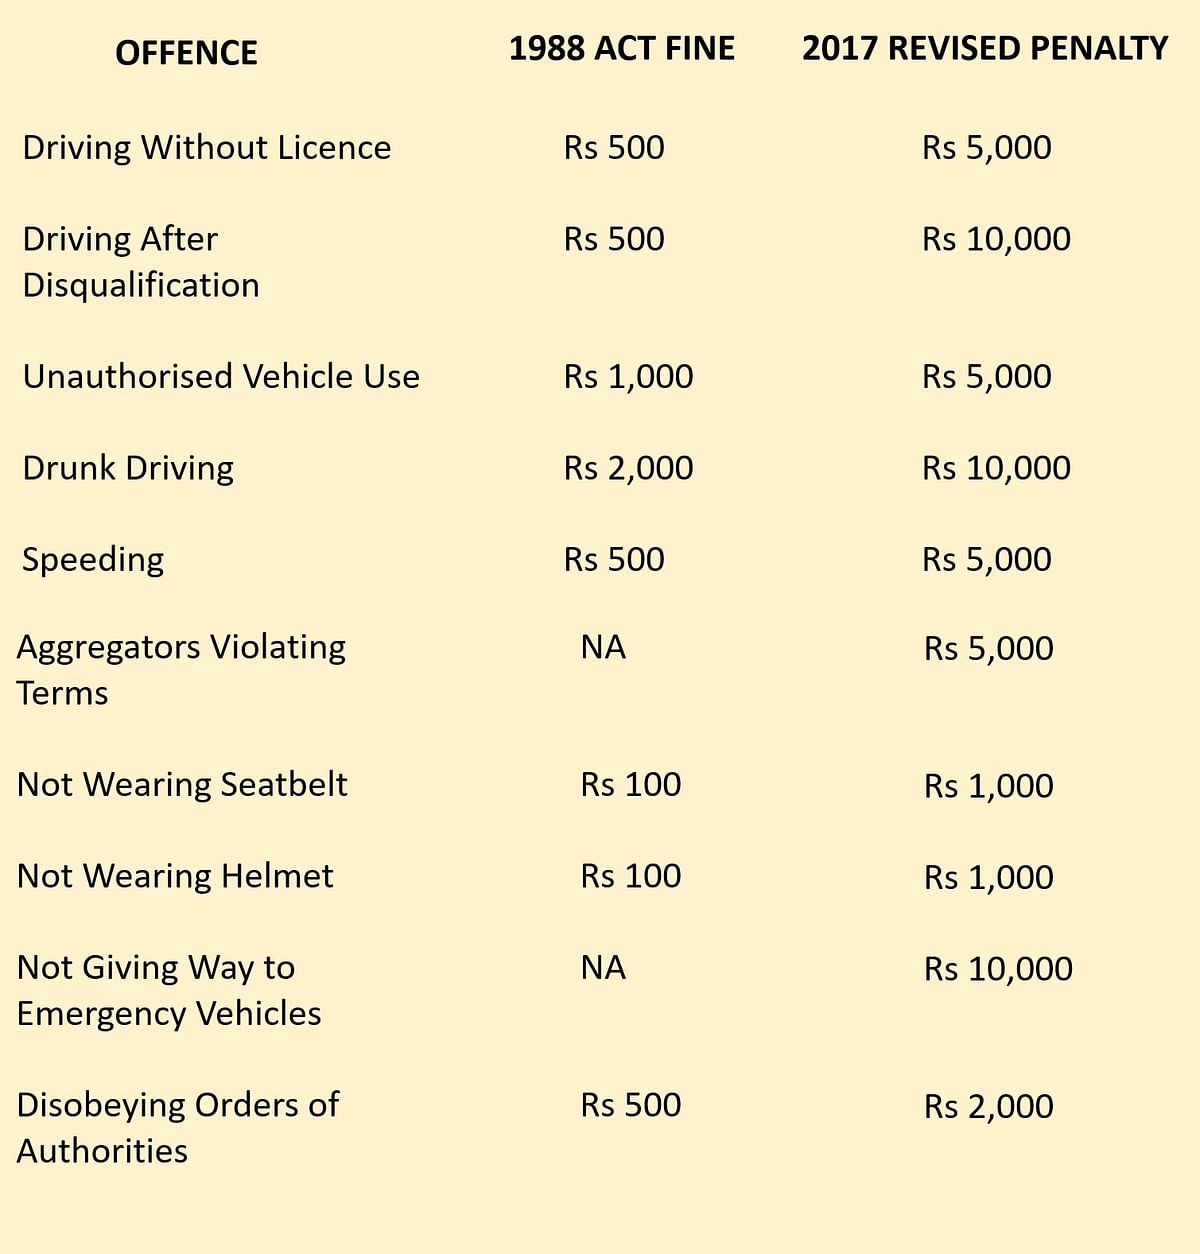 The revised bill calls for hefty penalties on  drunk driving, speeding and not giving way to emergency vehicles.